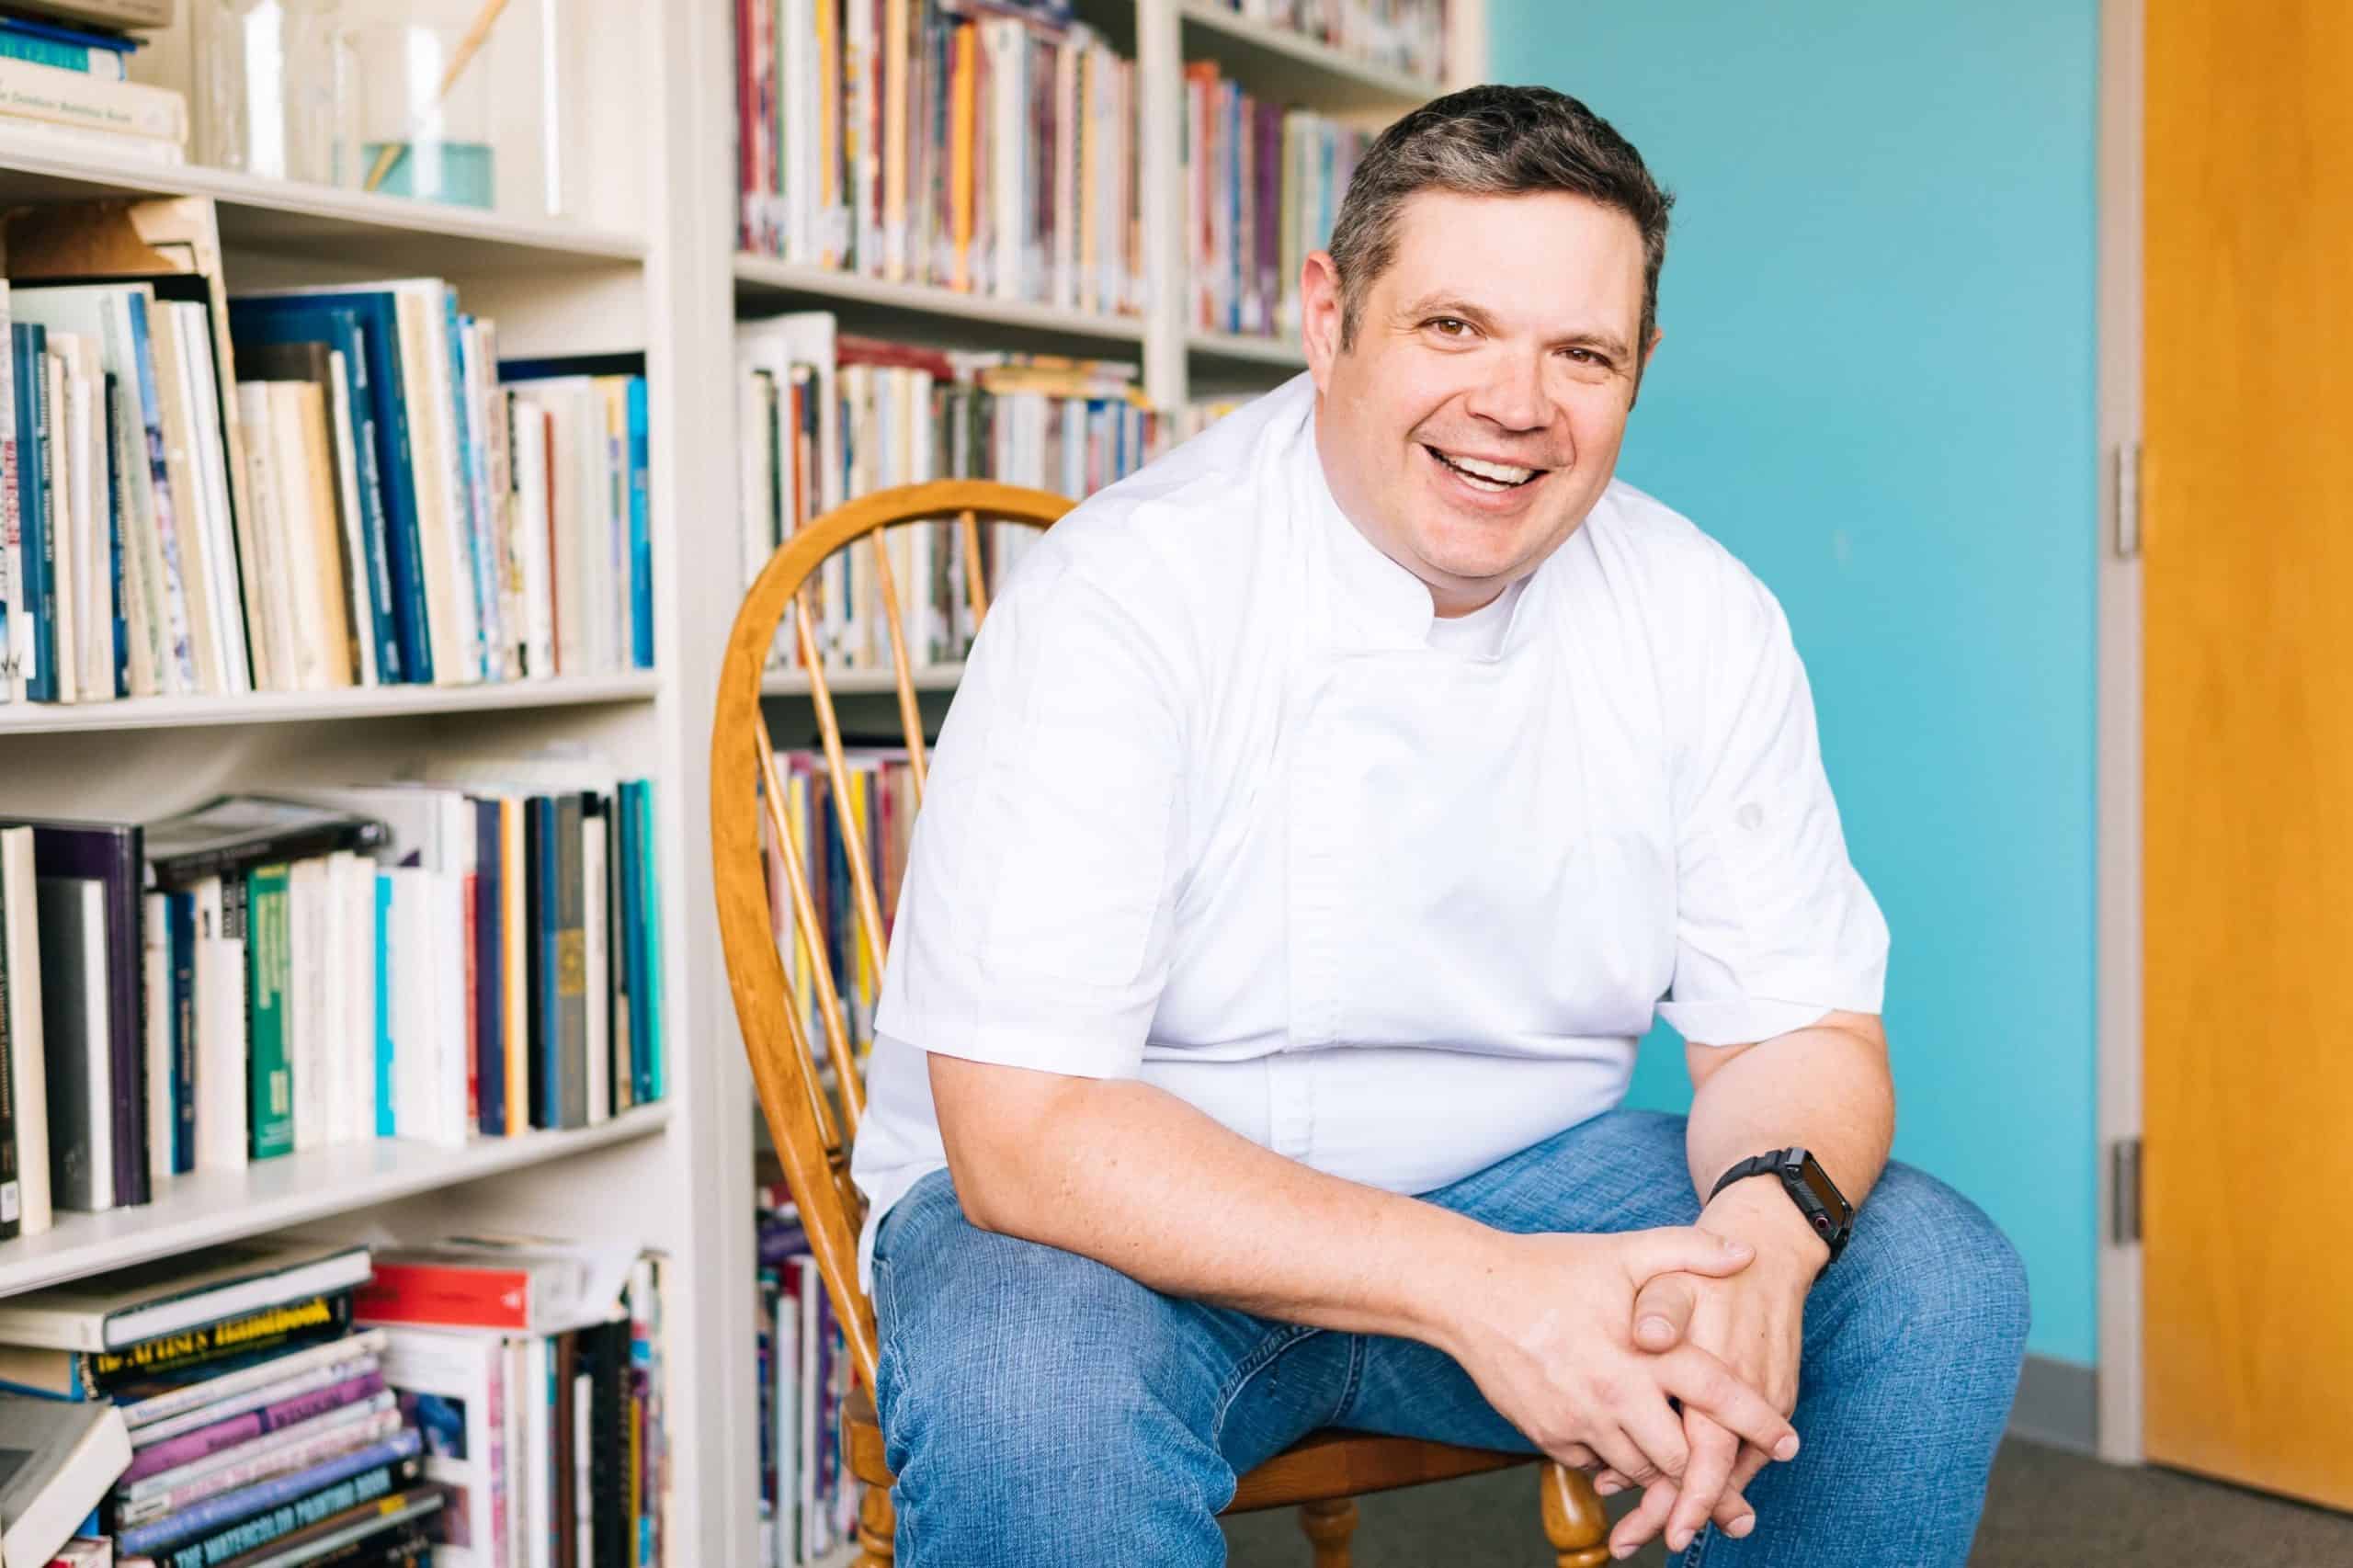 Chef Sitting in Front of Books